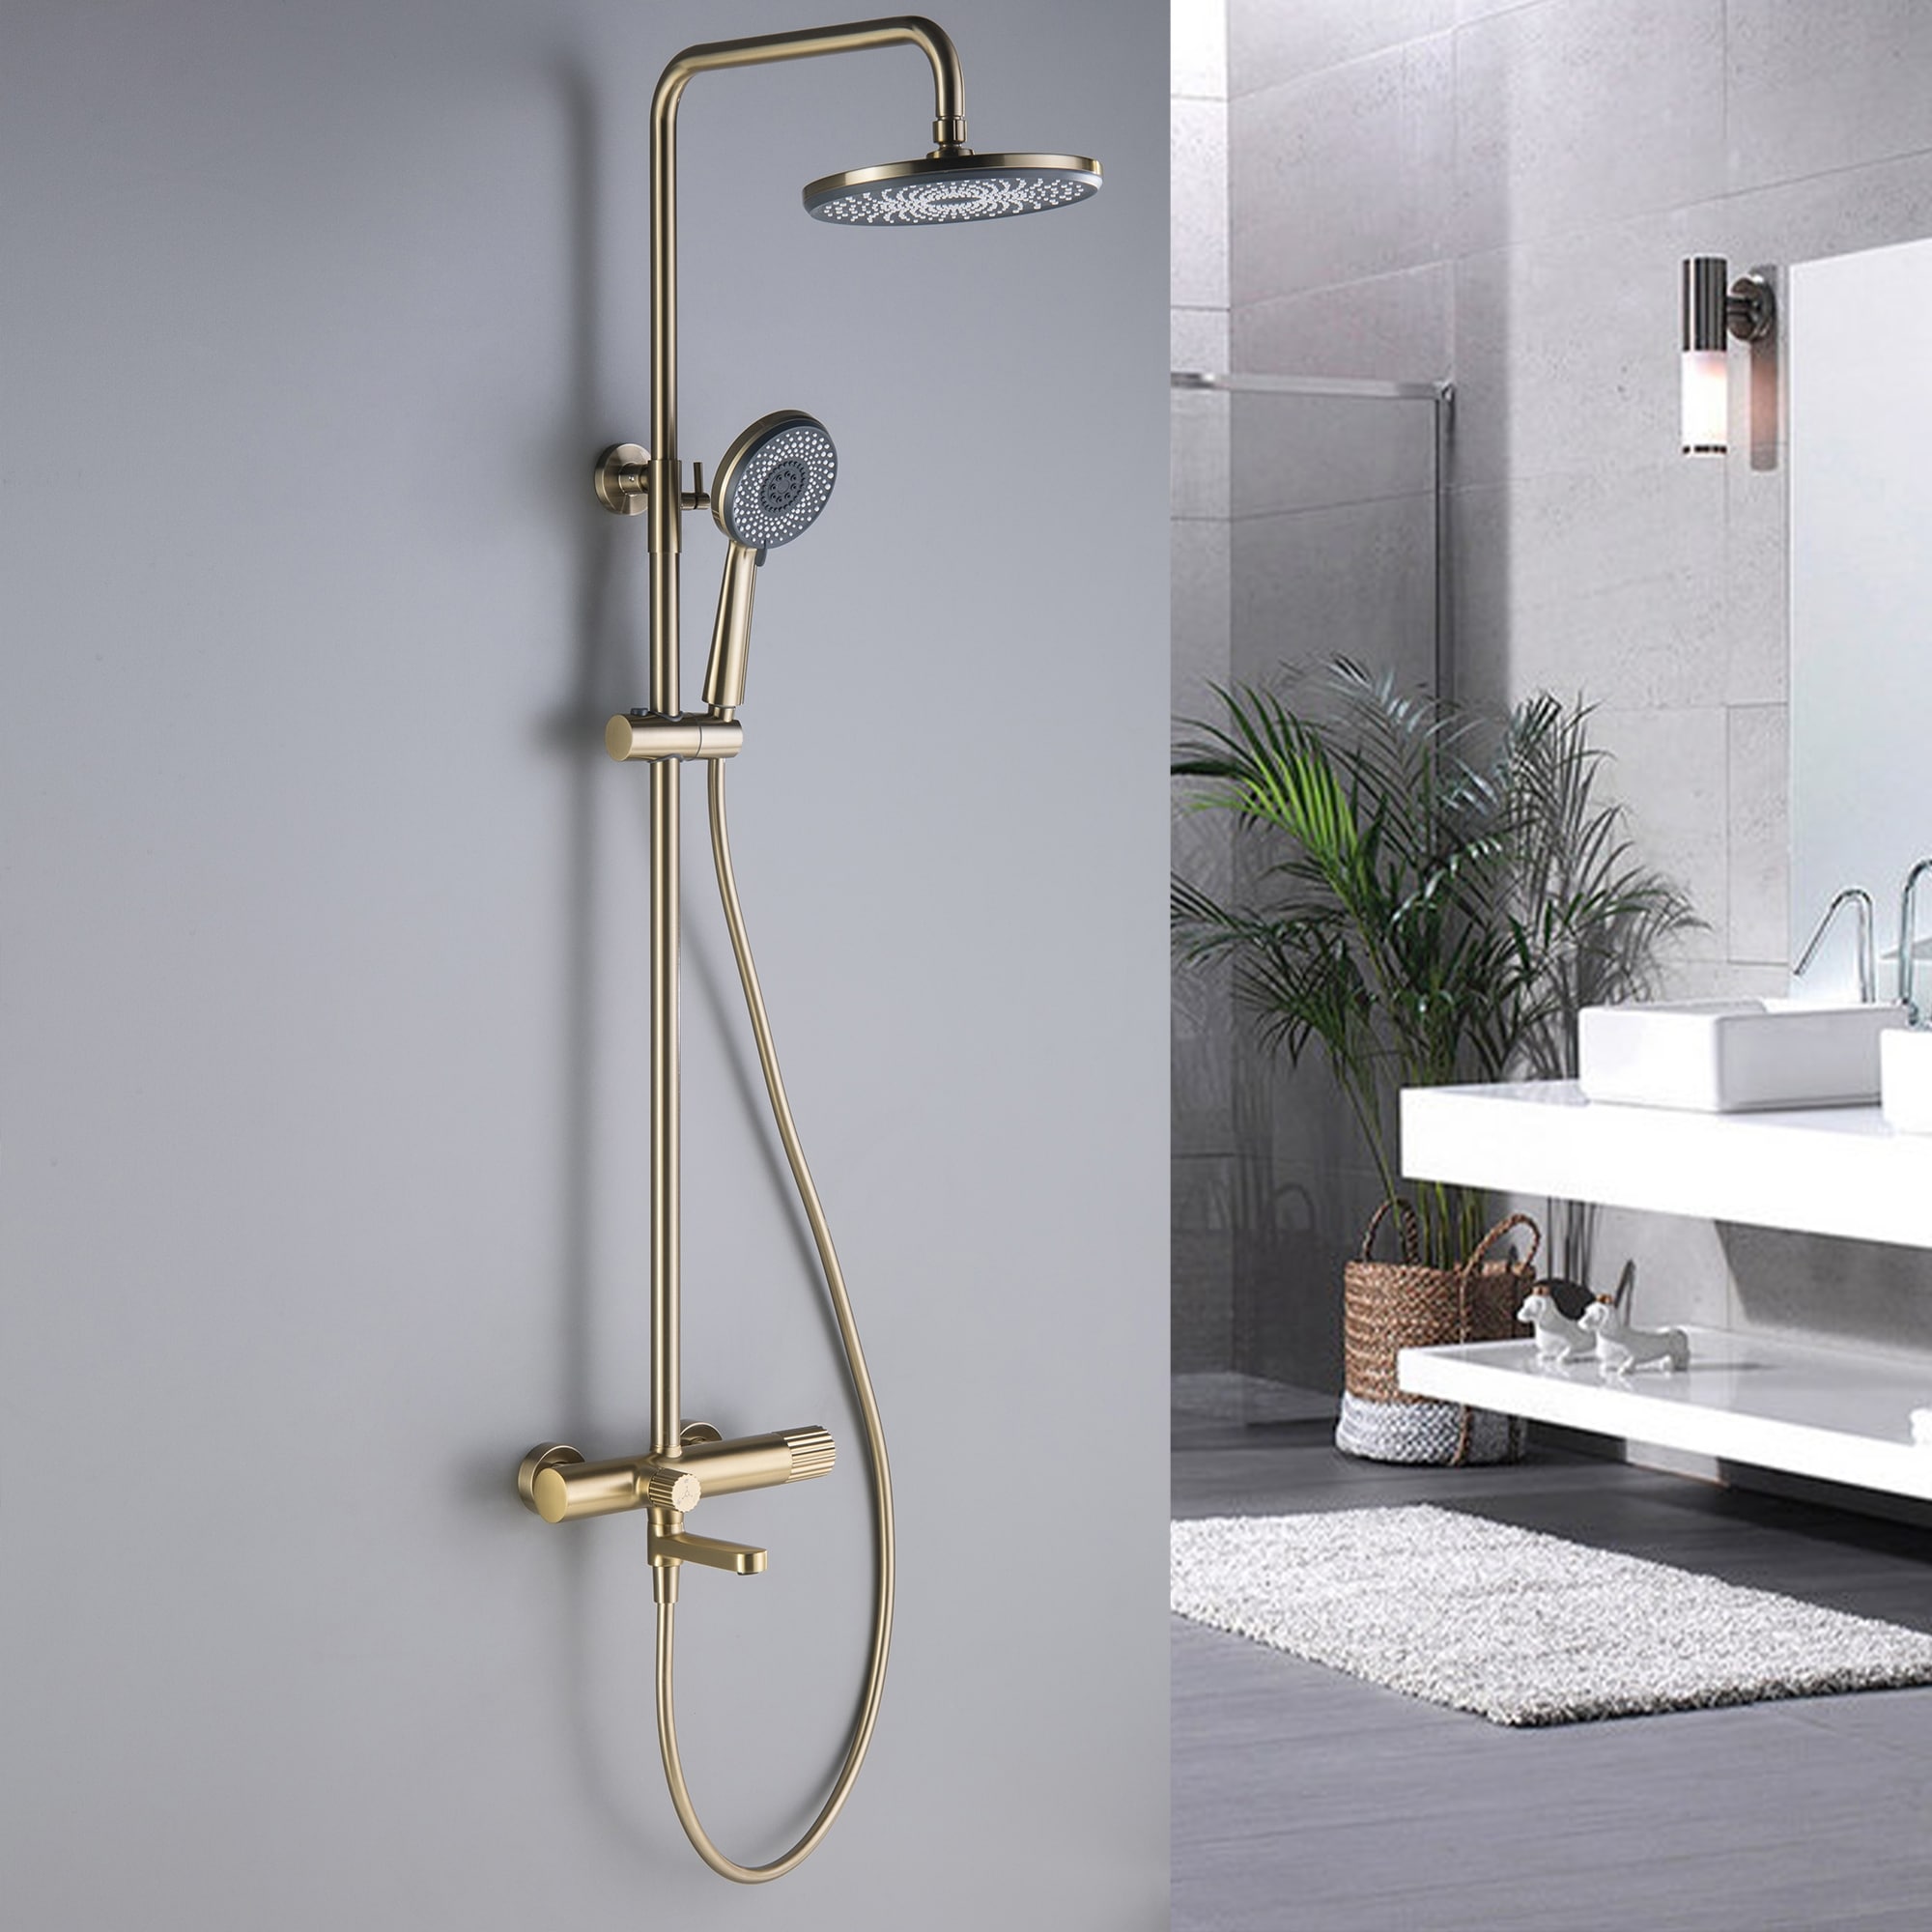 https://ak1.ostkcdn.com/images/products/is/images/direct/0cd6aa092ab531f1349c6048a88834a10201da6d/Luxury-Wall-Mounted-Exposed-Install-Shower-System-with-5-Way-Handheld-and-Bathtub-Faucet-In-Black-and-Gold.jpg